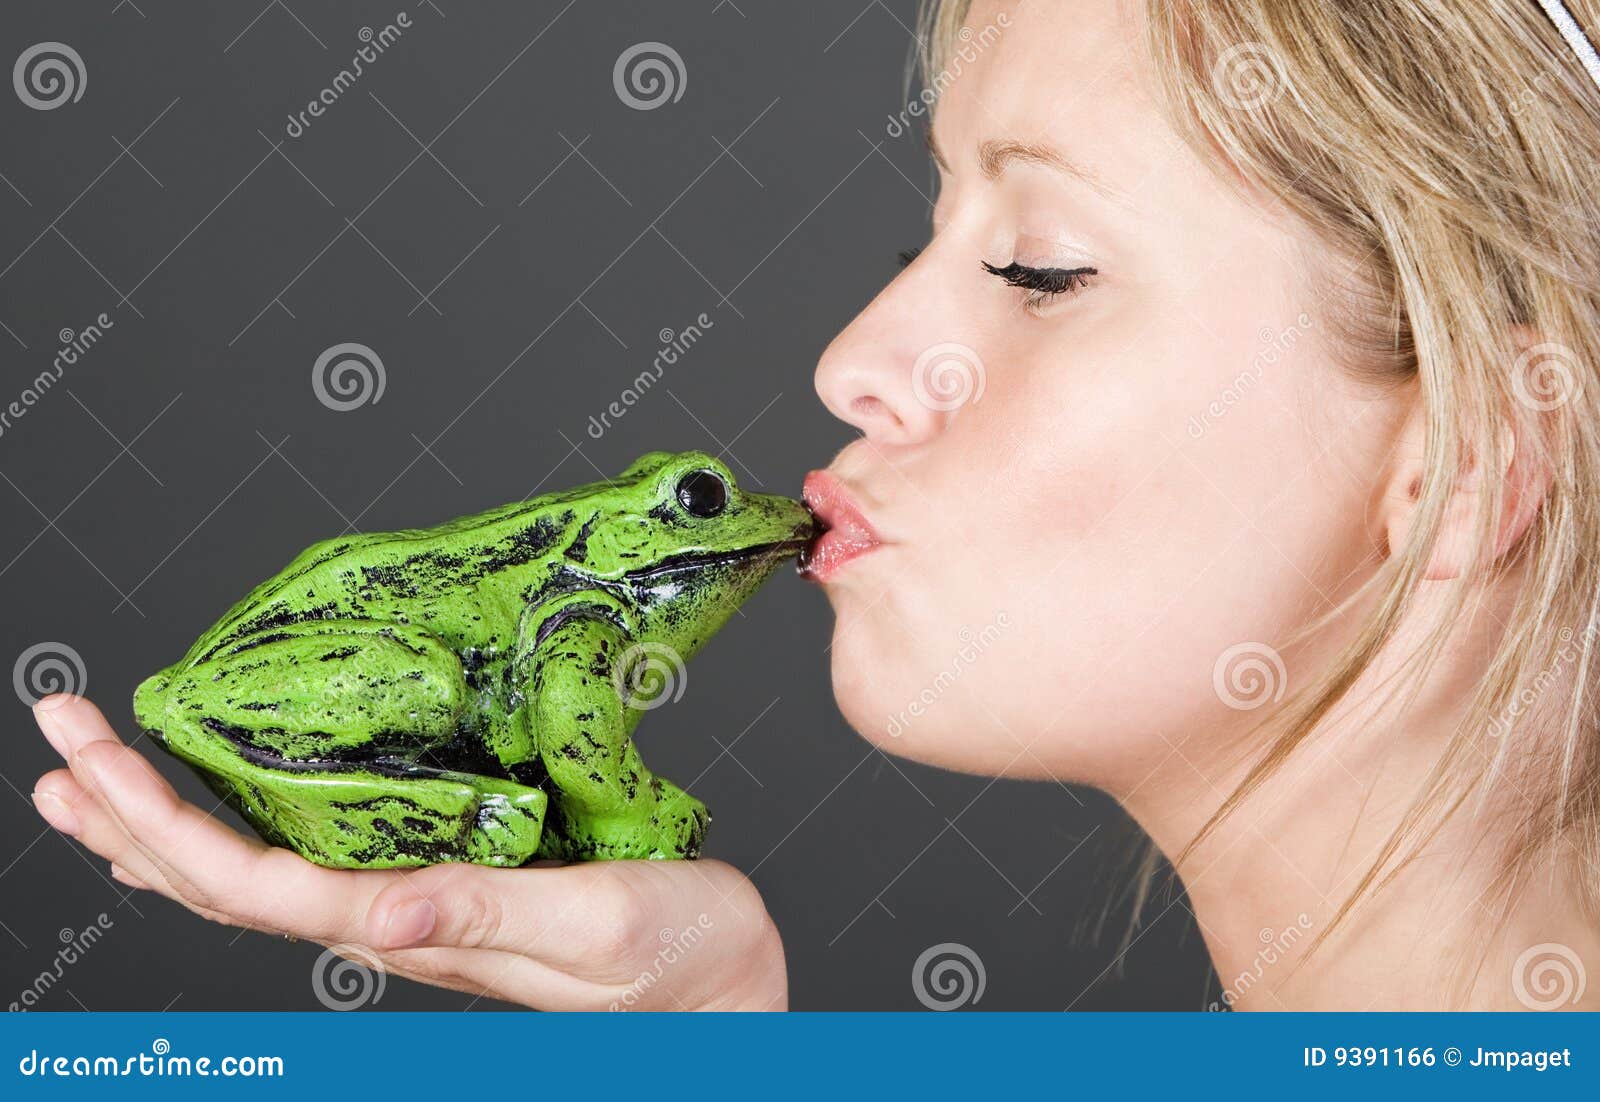 stunning blonde girl kissing a frog